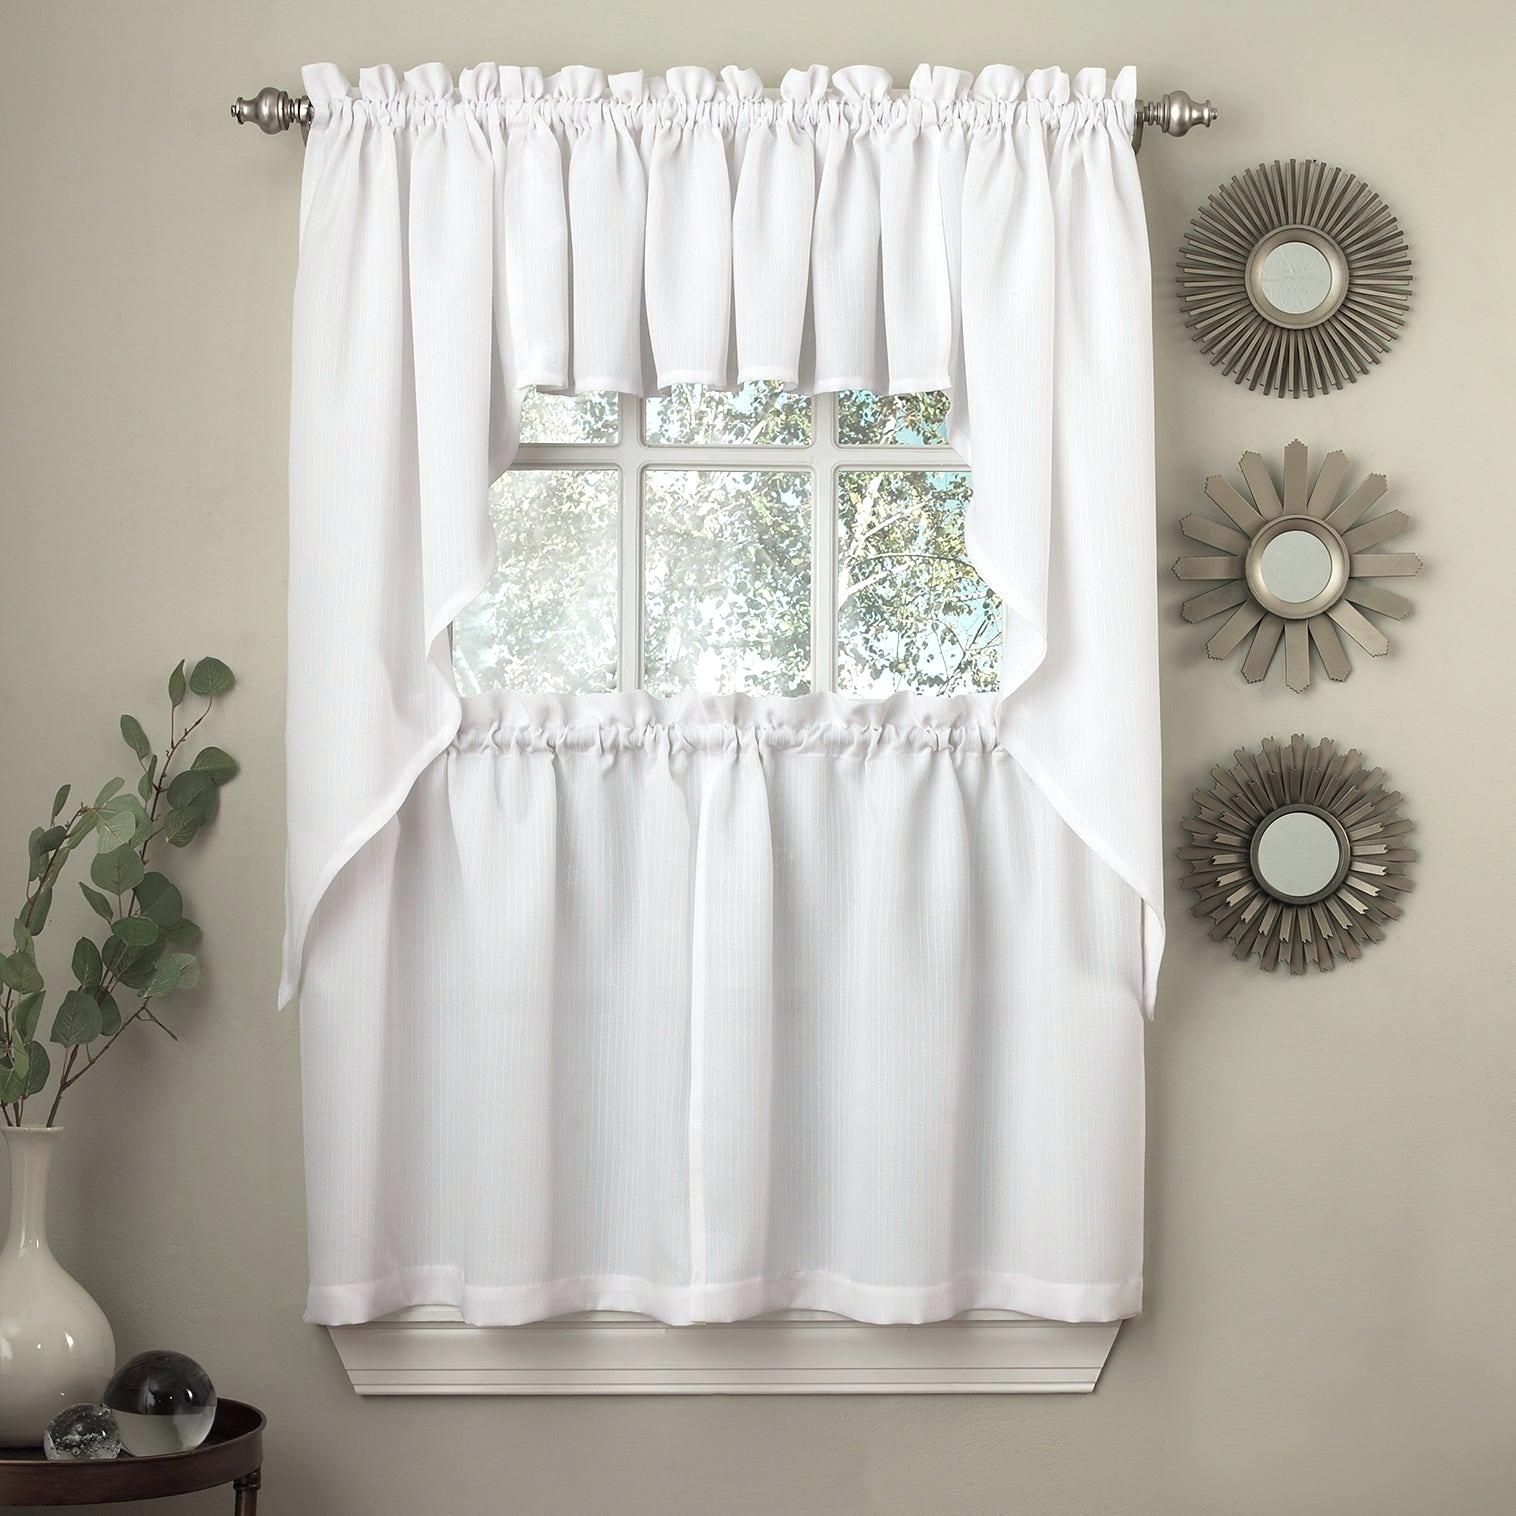 Curtain Tiers – Churubuscochamber With White Knit Lace Bird Motif Window Curtain Tiers (Photo 20 of 20)